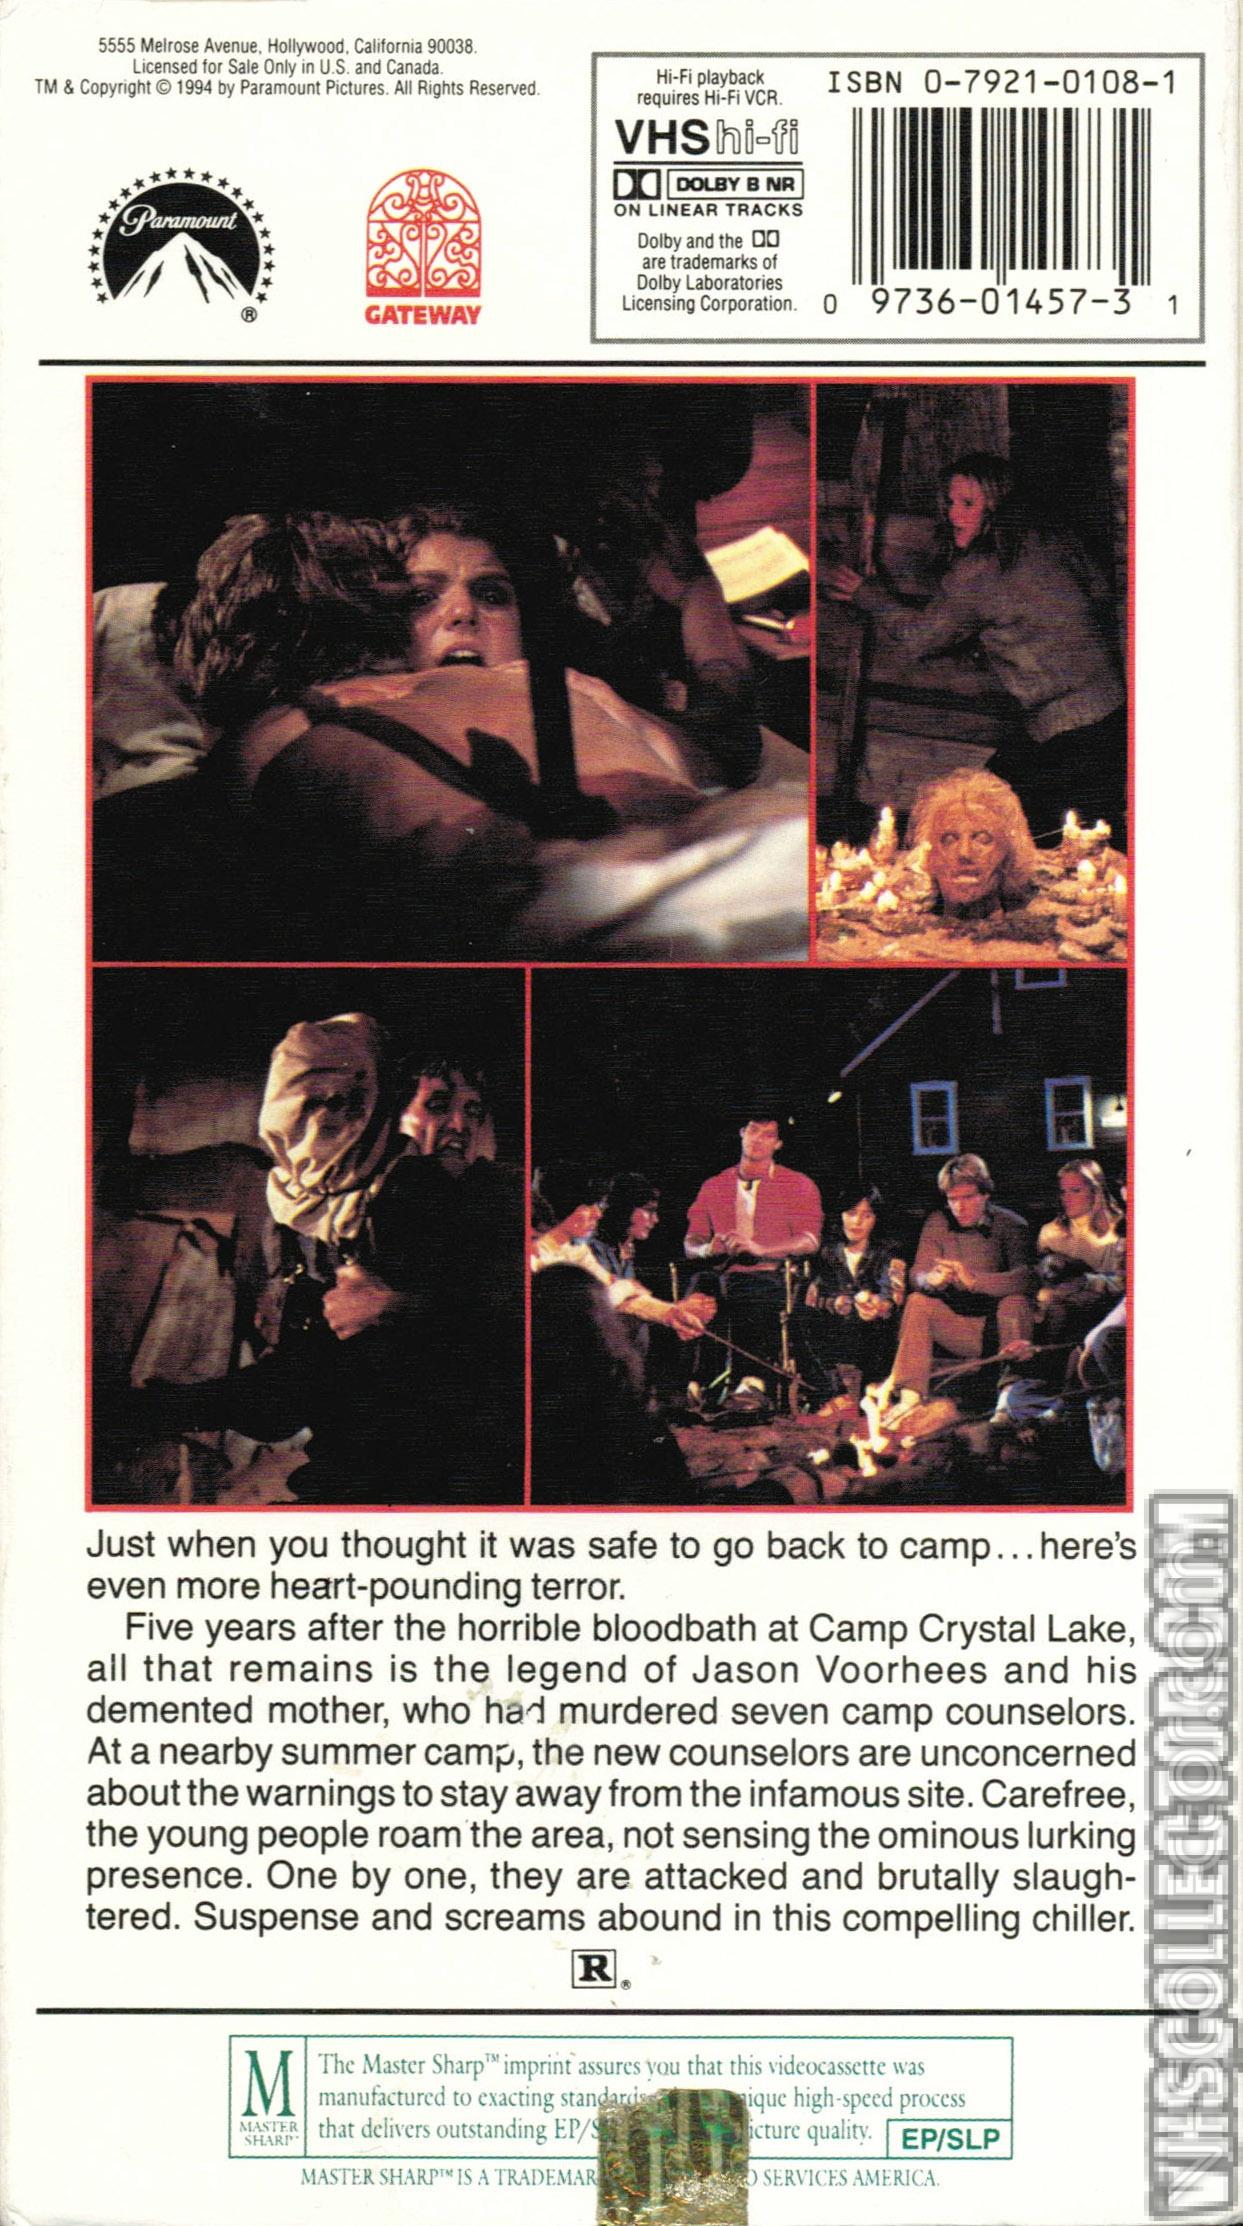 Friday The 13th Part 2 | VHSCollector.com